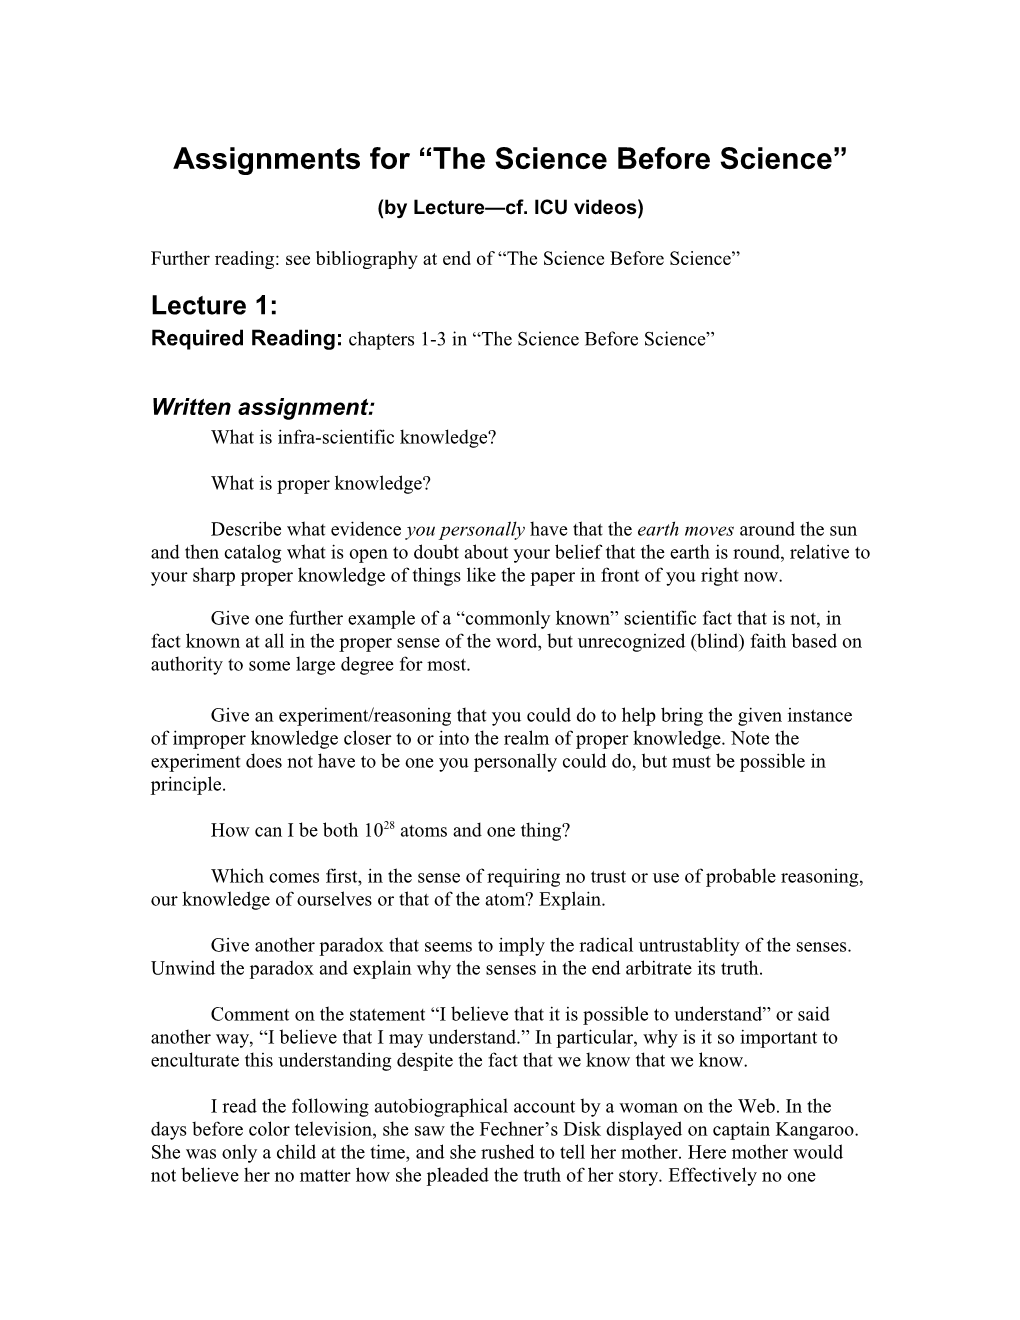 Assignments for the Science Before Science